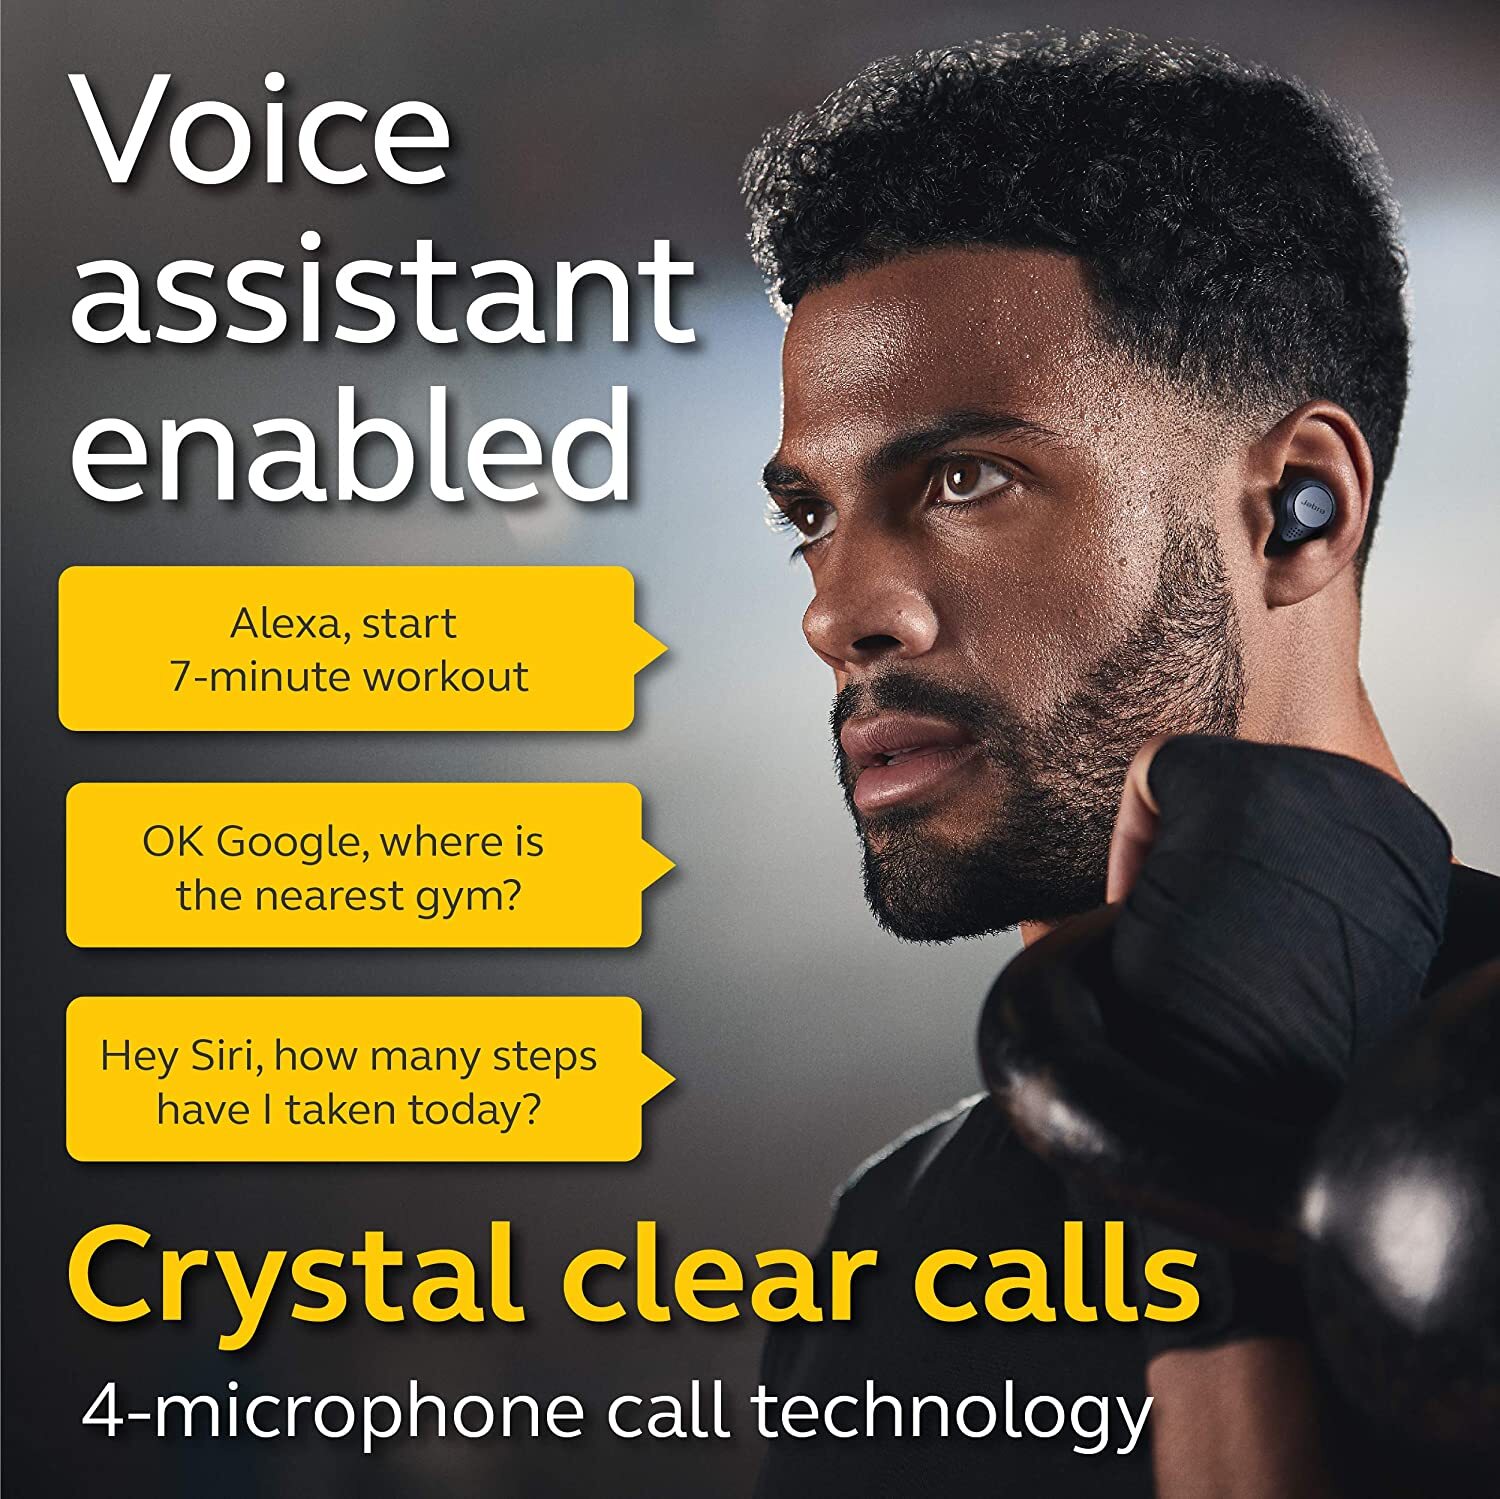 Jabra Elite Active 75t Earbuds, Alexa Enabled,  Compact, Waterproof, dust and sweat resistant, True Wireless Earbuds with Charging Case - Navy-M000000000430 www.mysocially.com